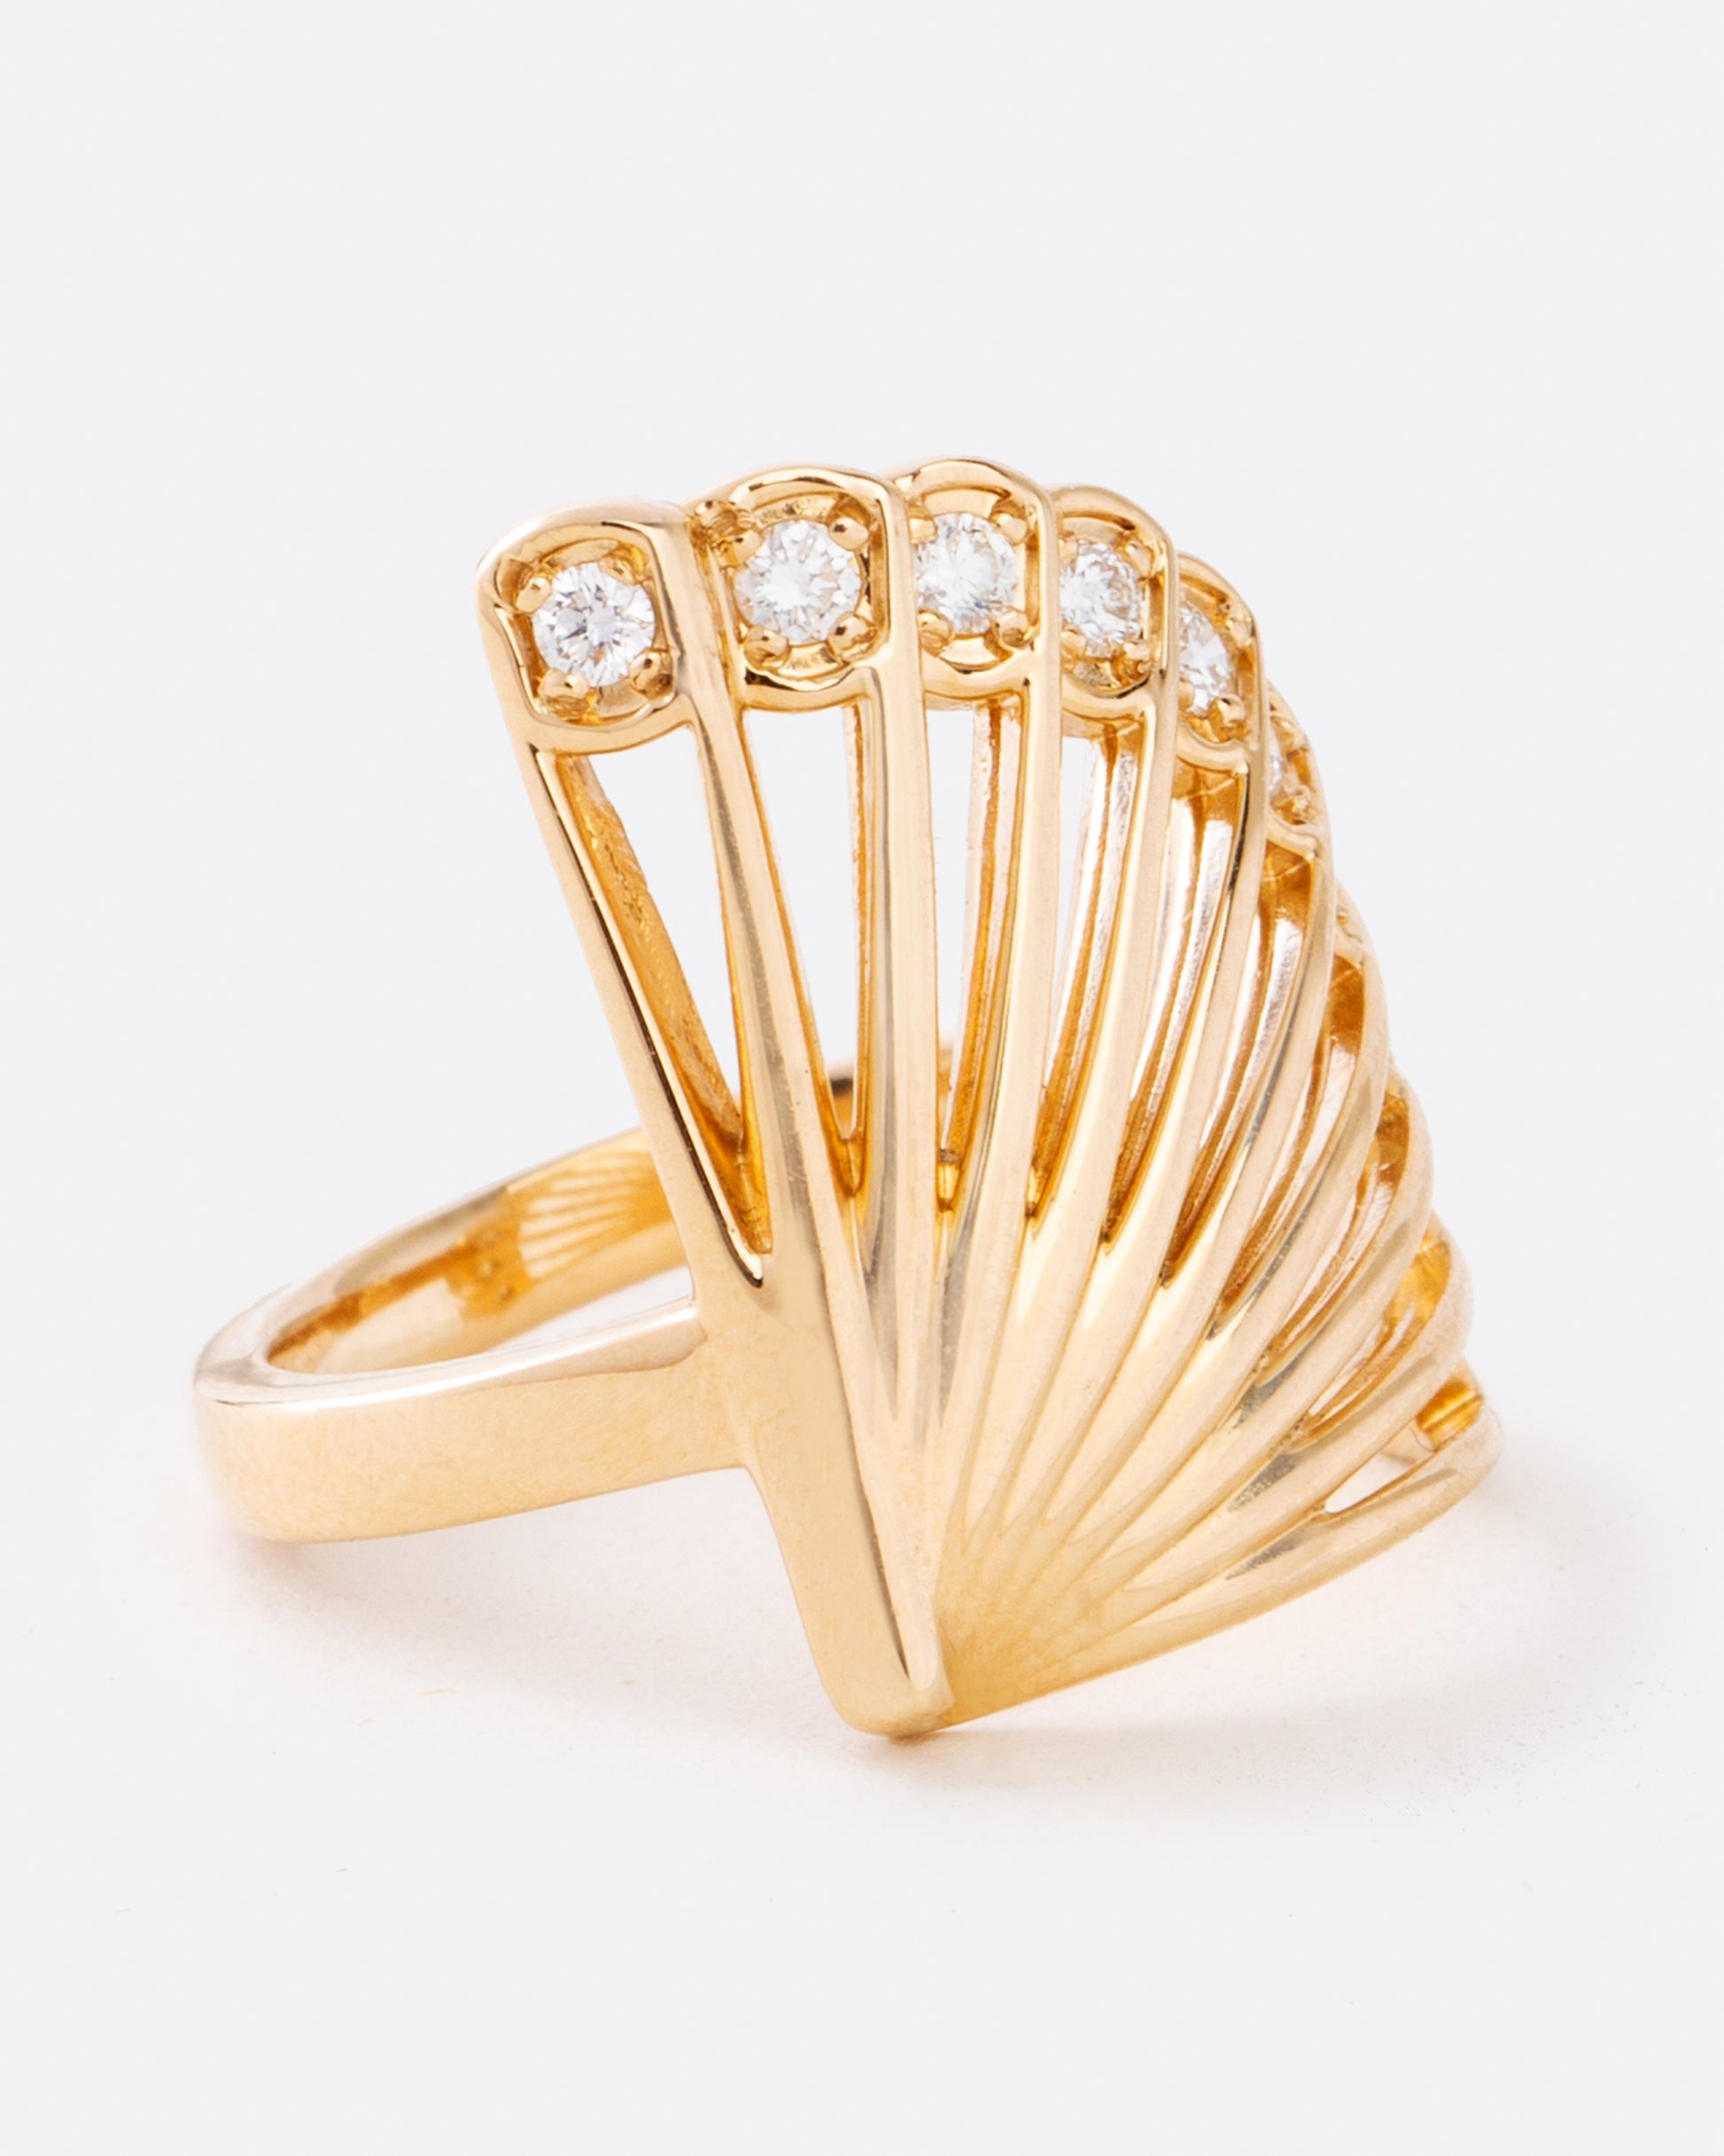 This incredible ring, modeled after the shape of a fan, features brilliant cut diamonds along its edge.